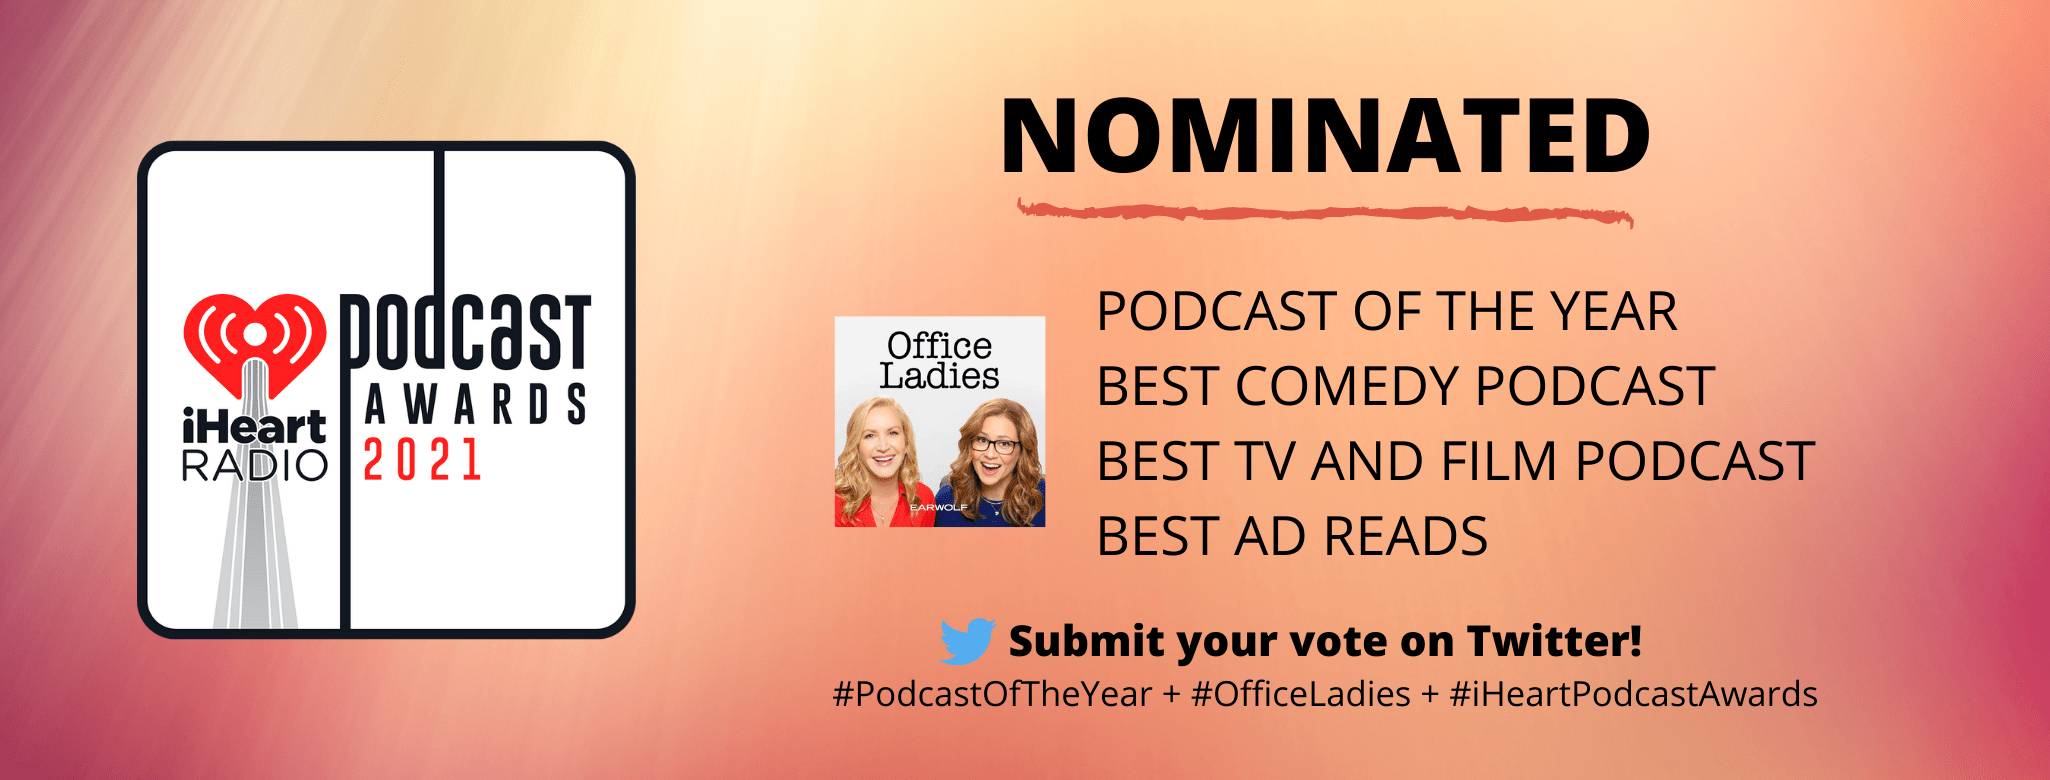 2021 iHeartRadio Podcast Awards won by 'Office Ladies'